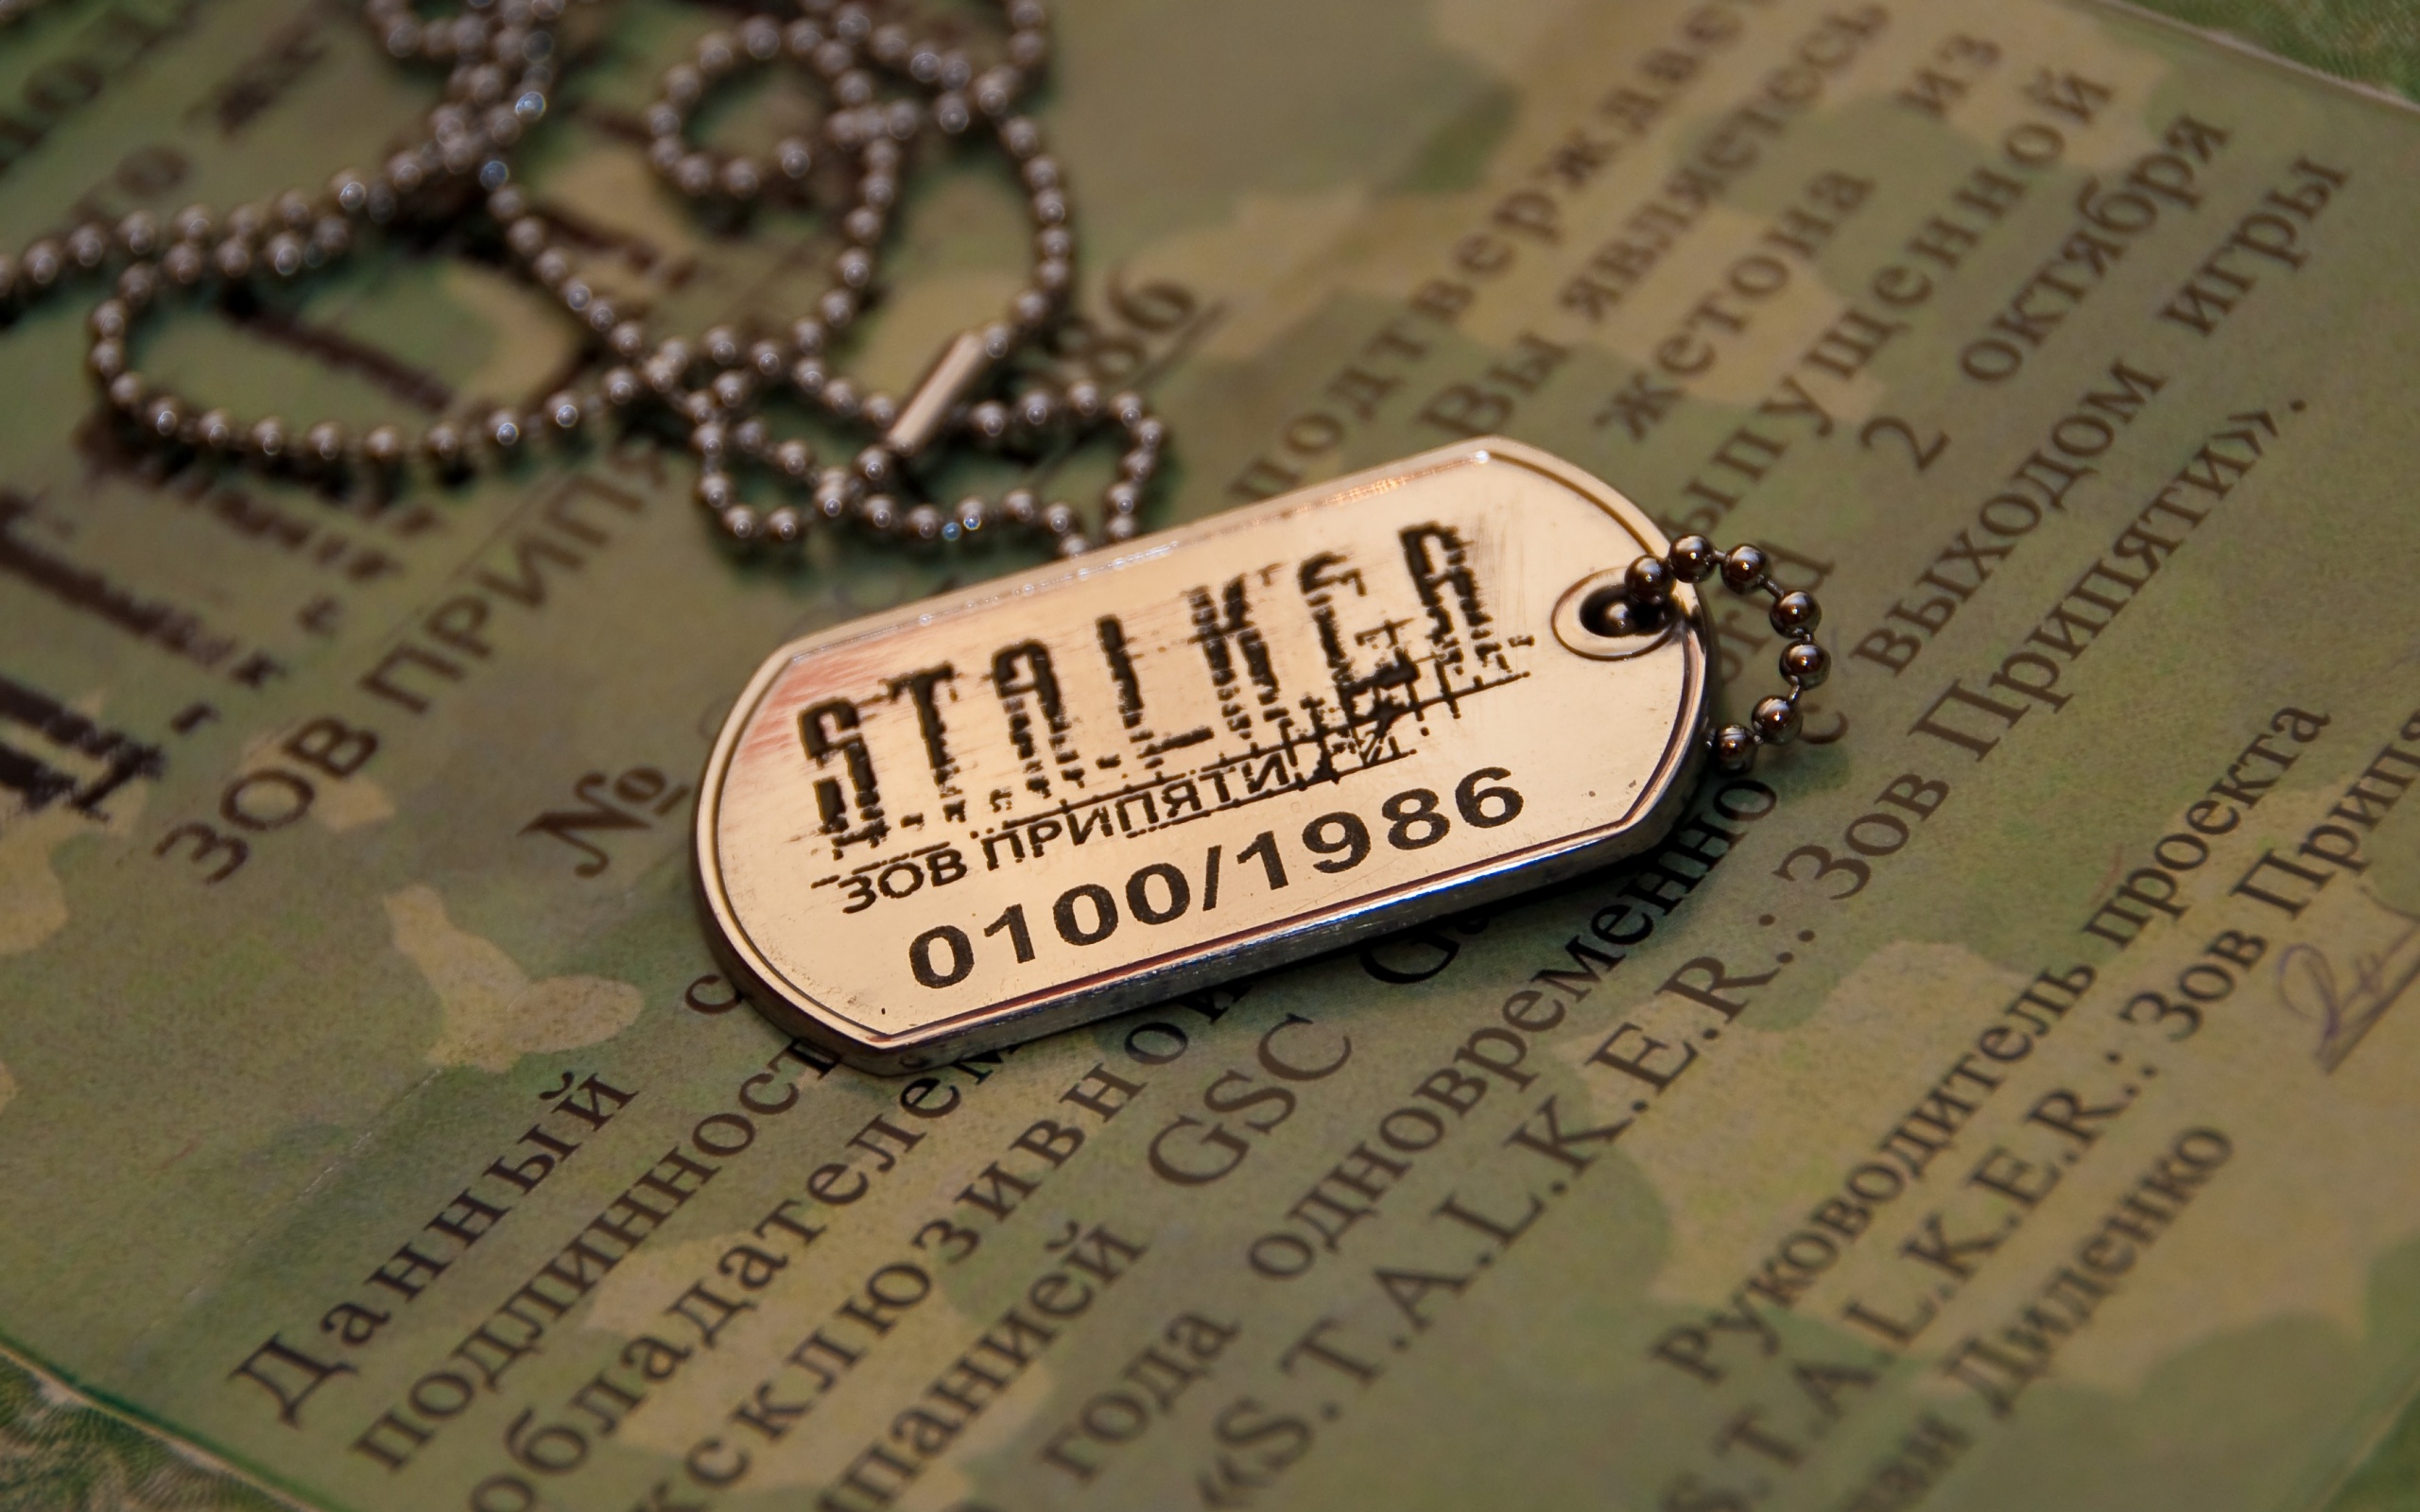 S.T.A.L.K.E.R. themed desktop wallpaper showcasing a dog tag, perfect for video game fans.